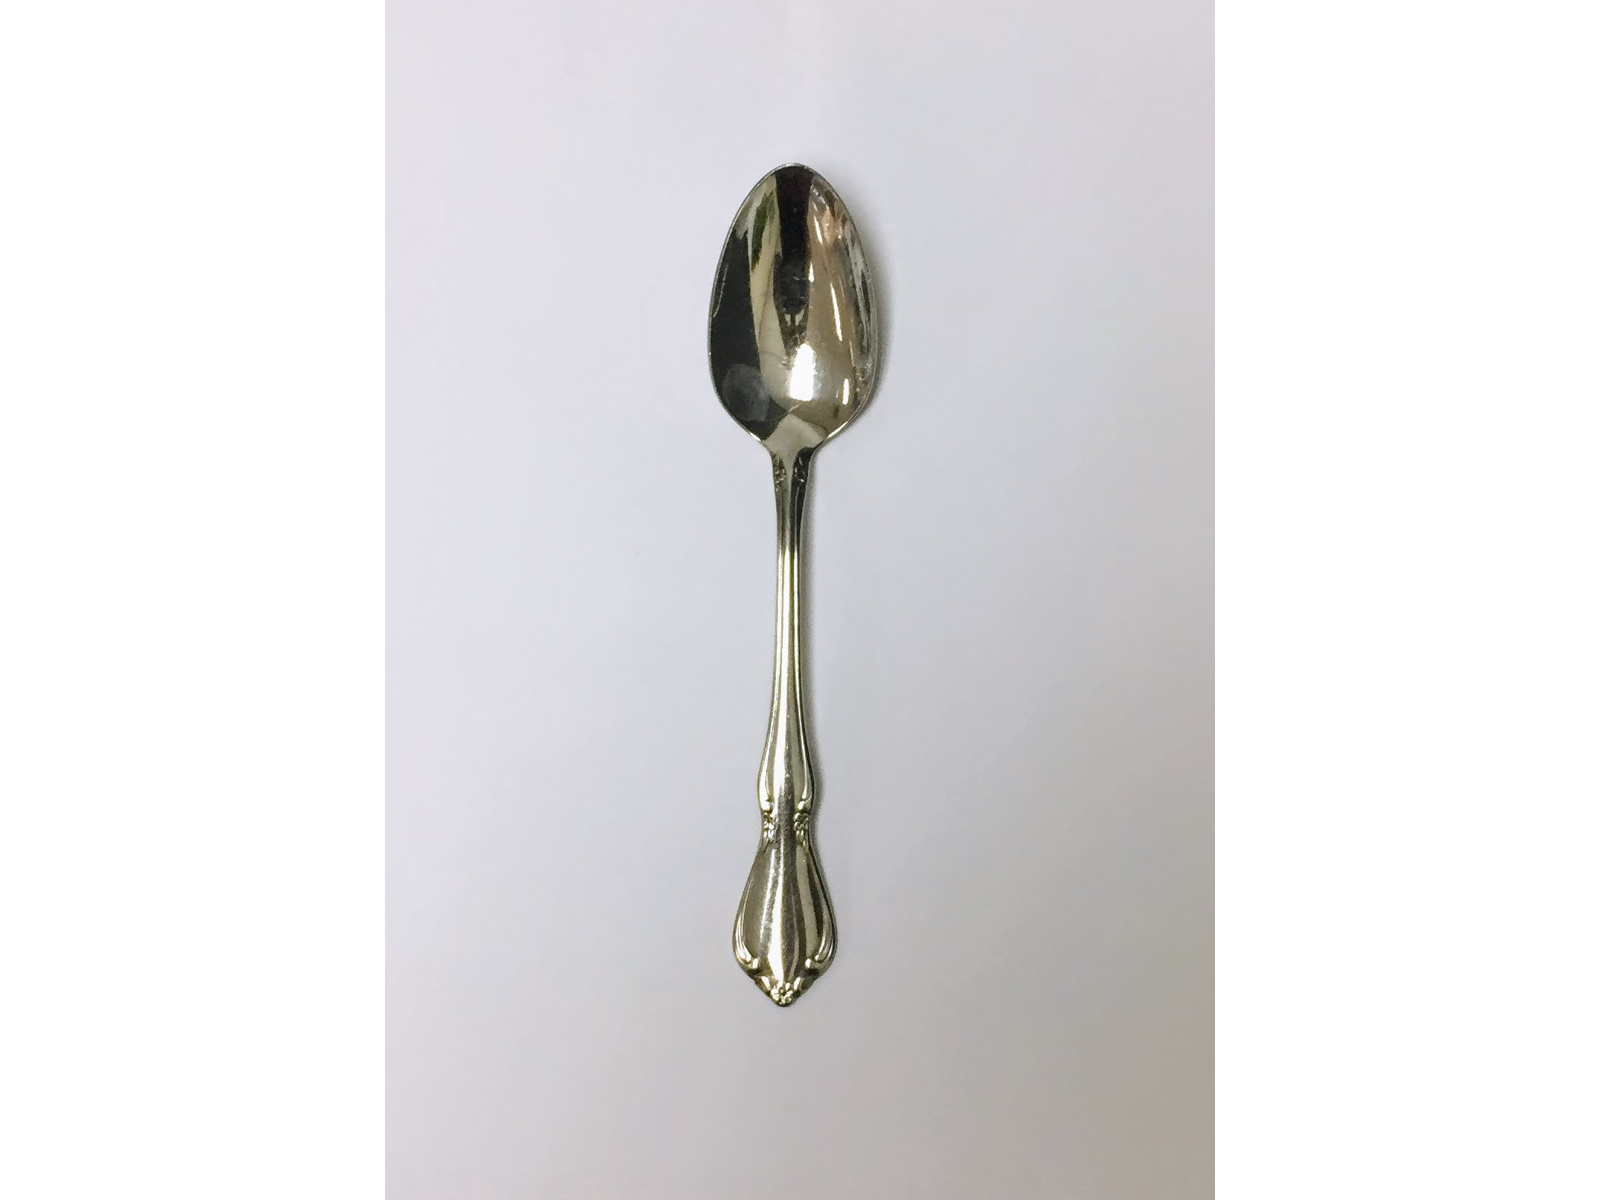 stainless spoon